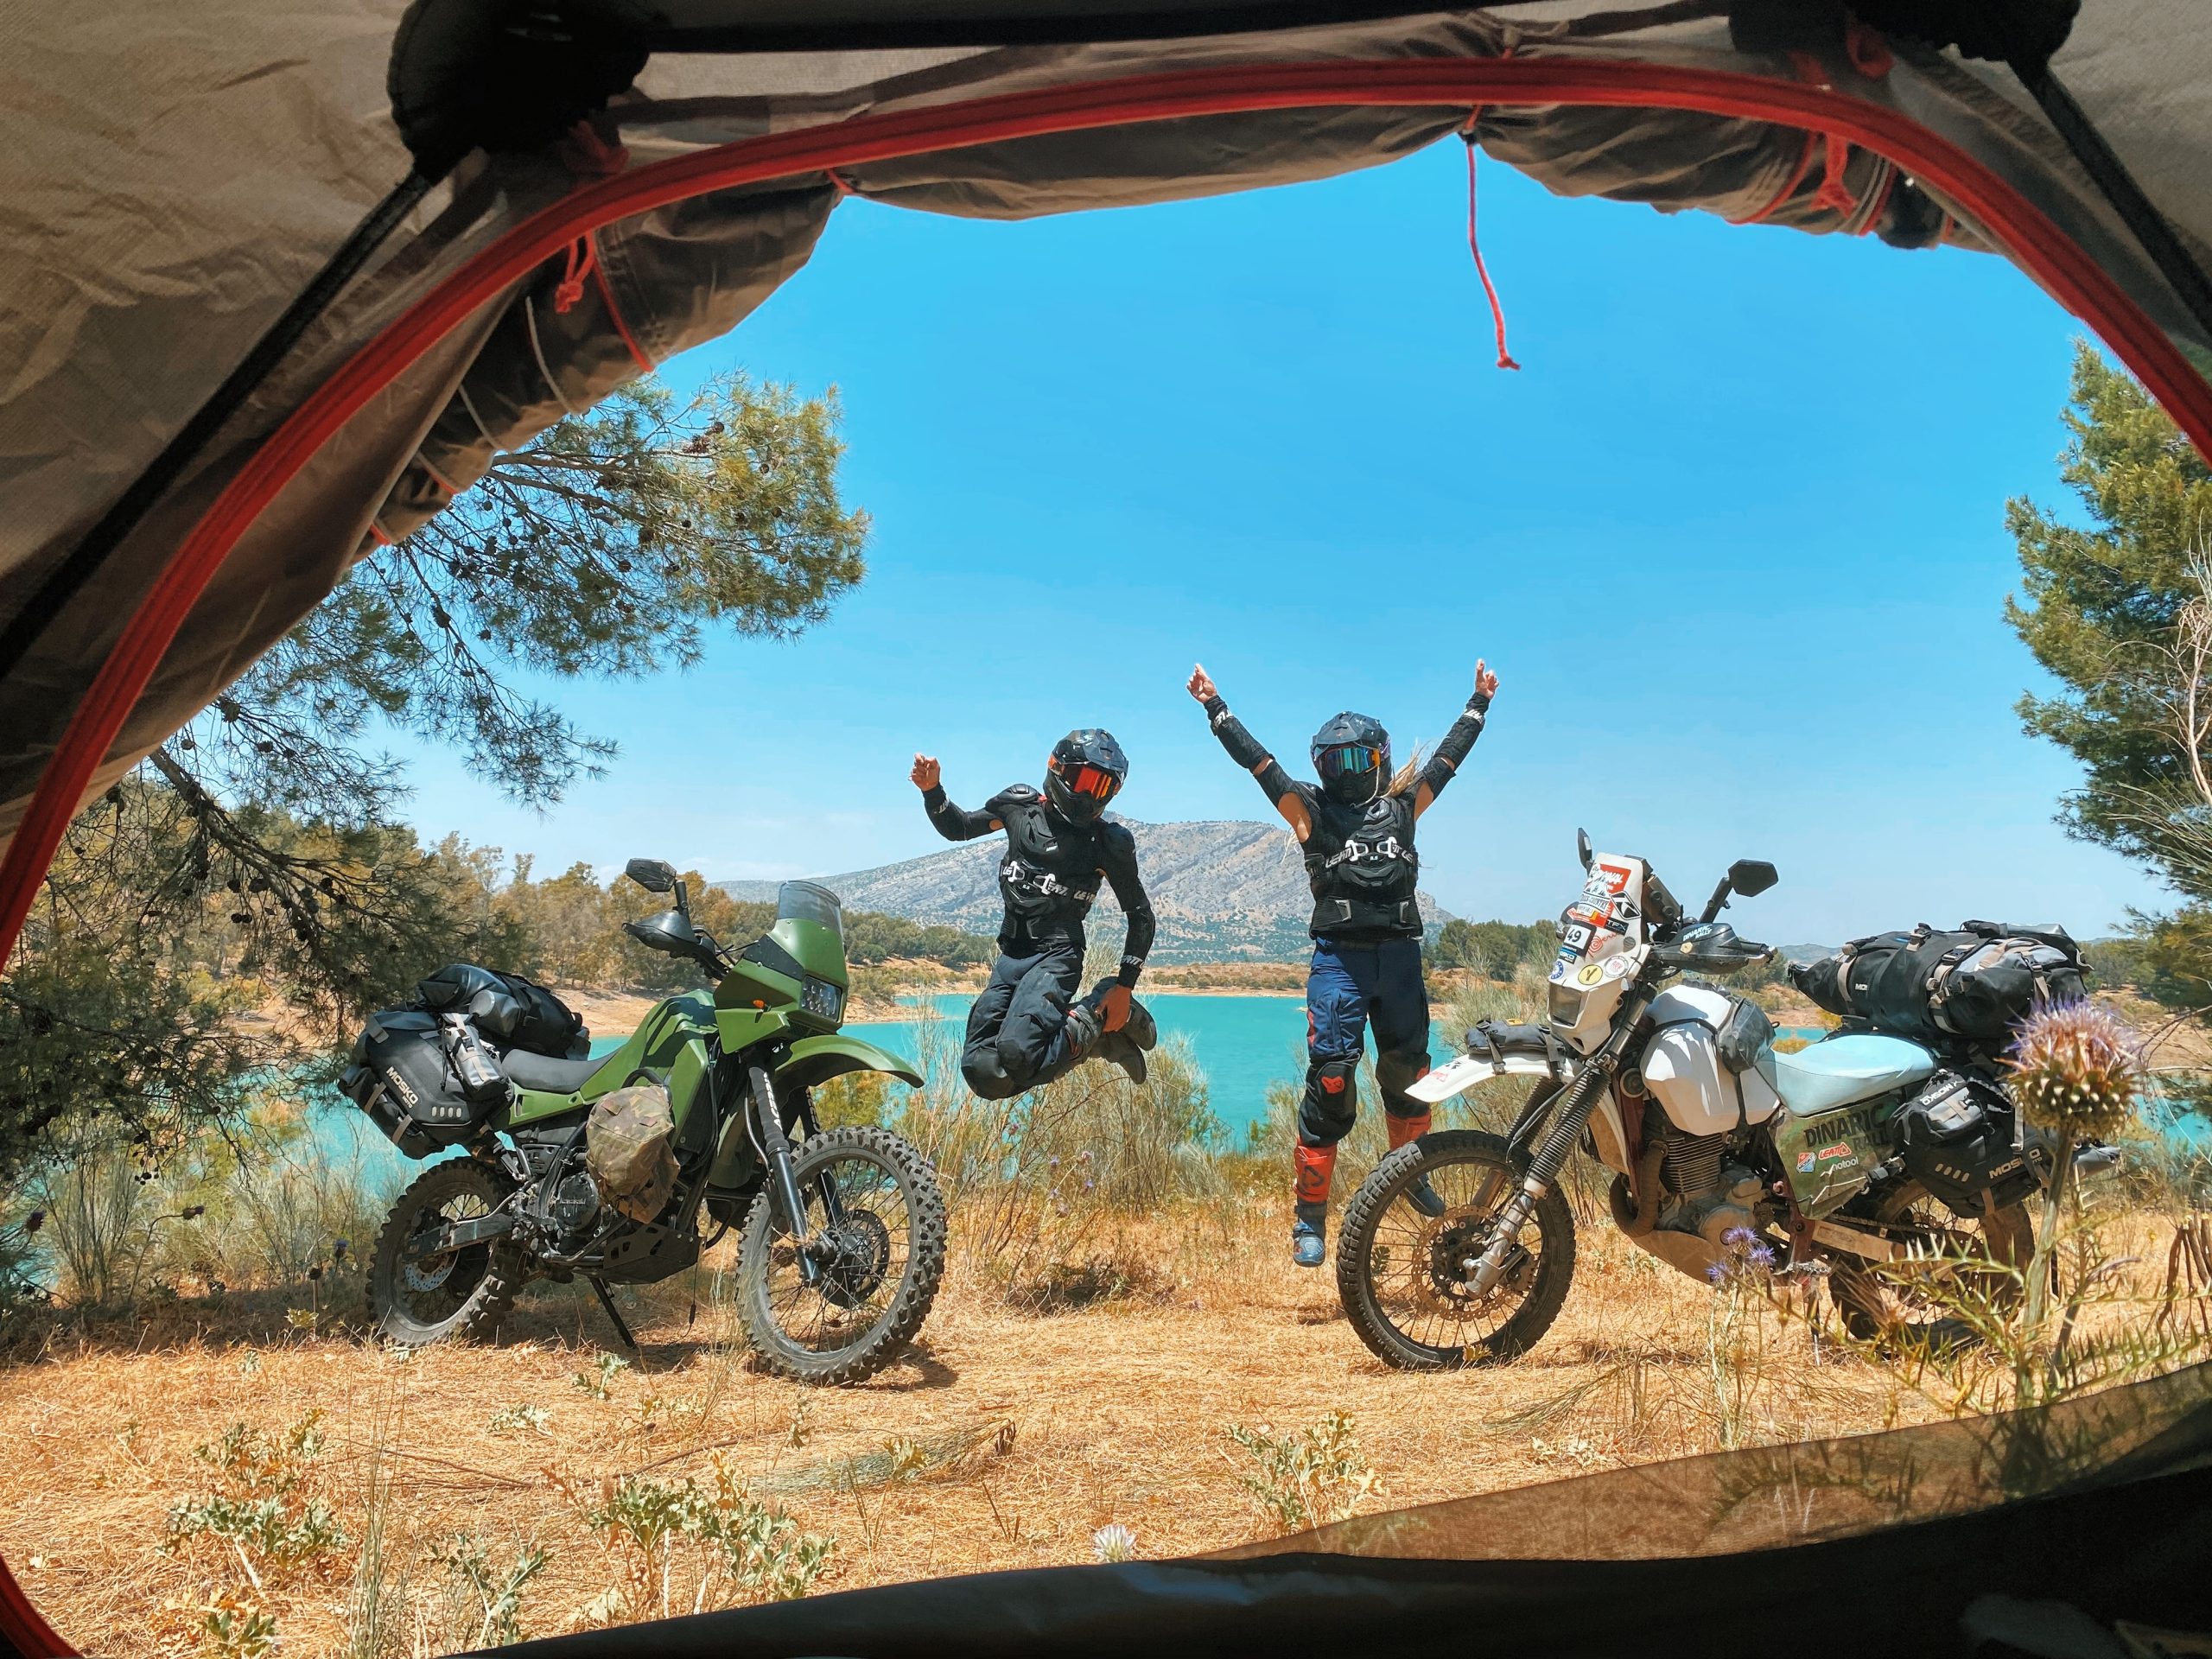 Where to Sleep When Riding a Motorcycle Cross Country? // ADV Bound